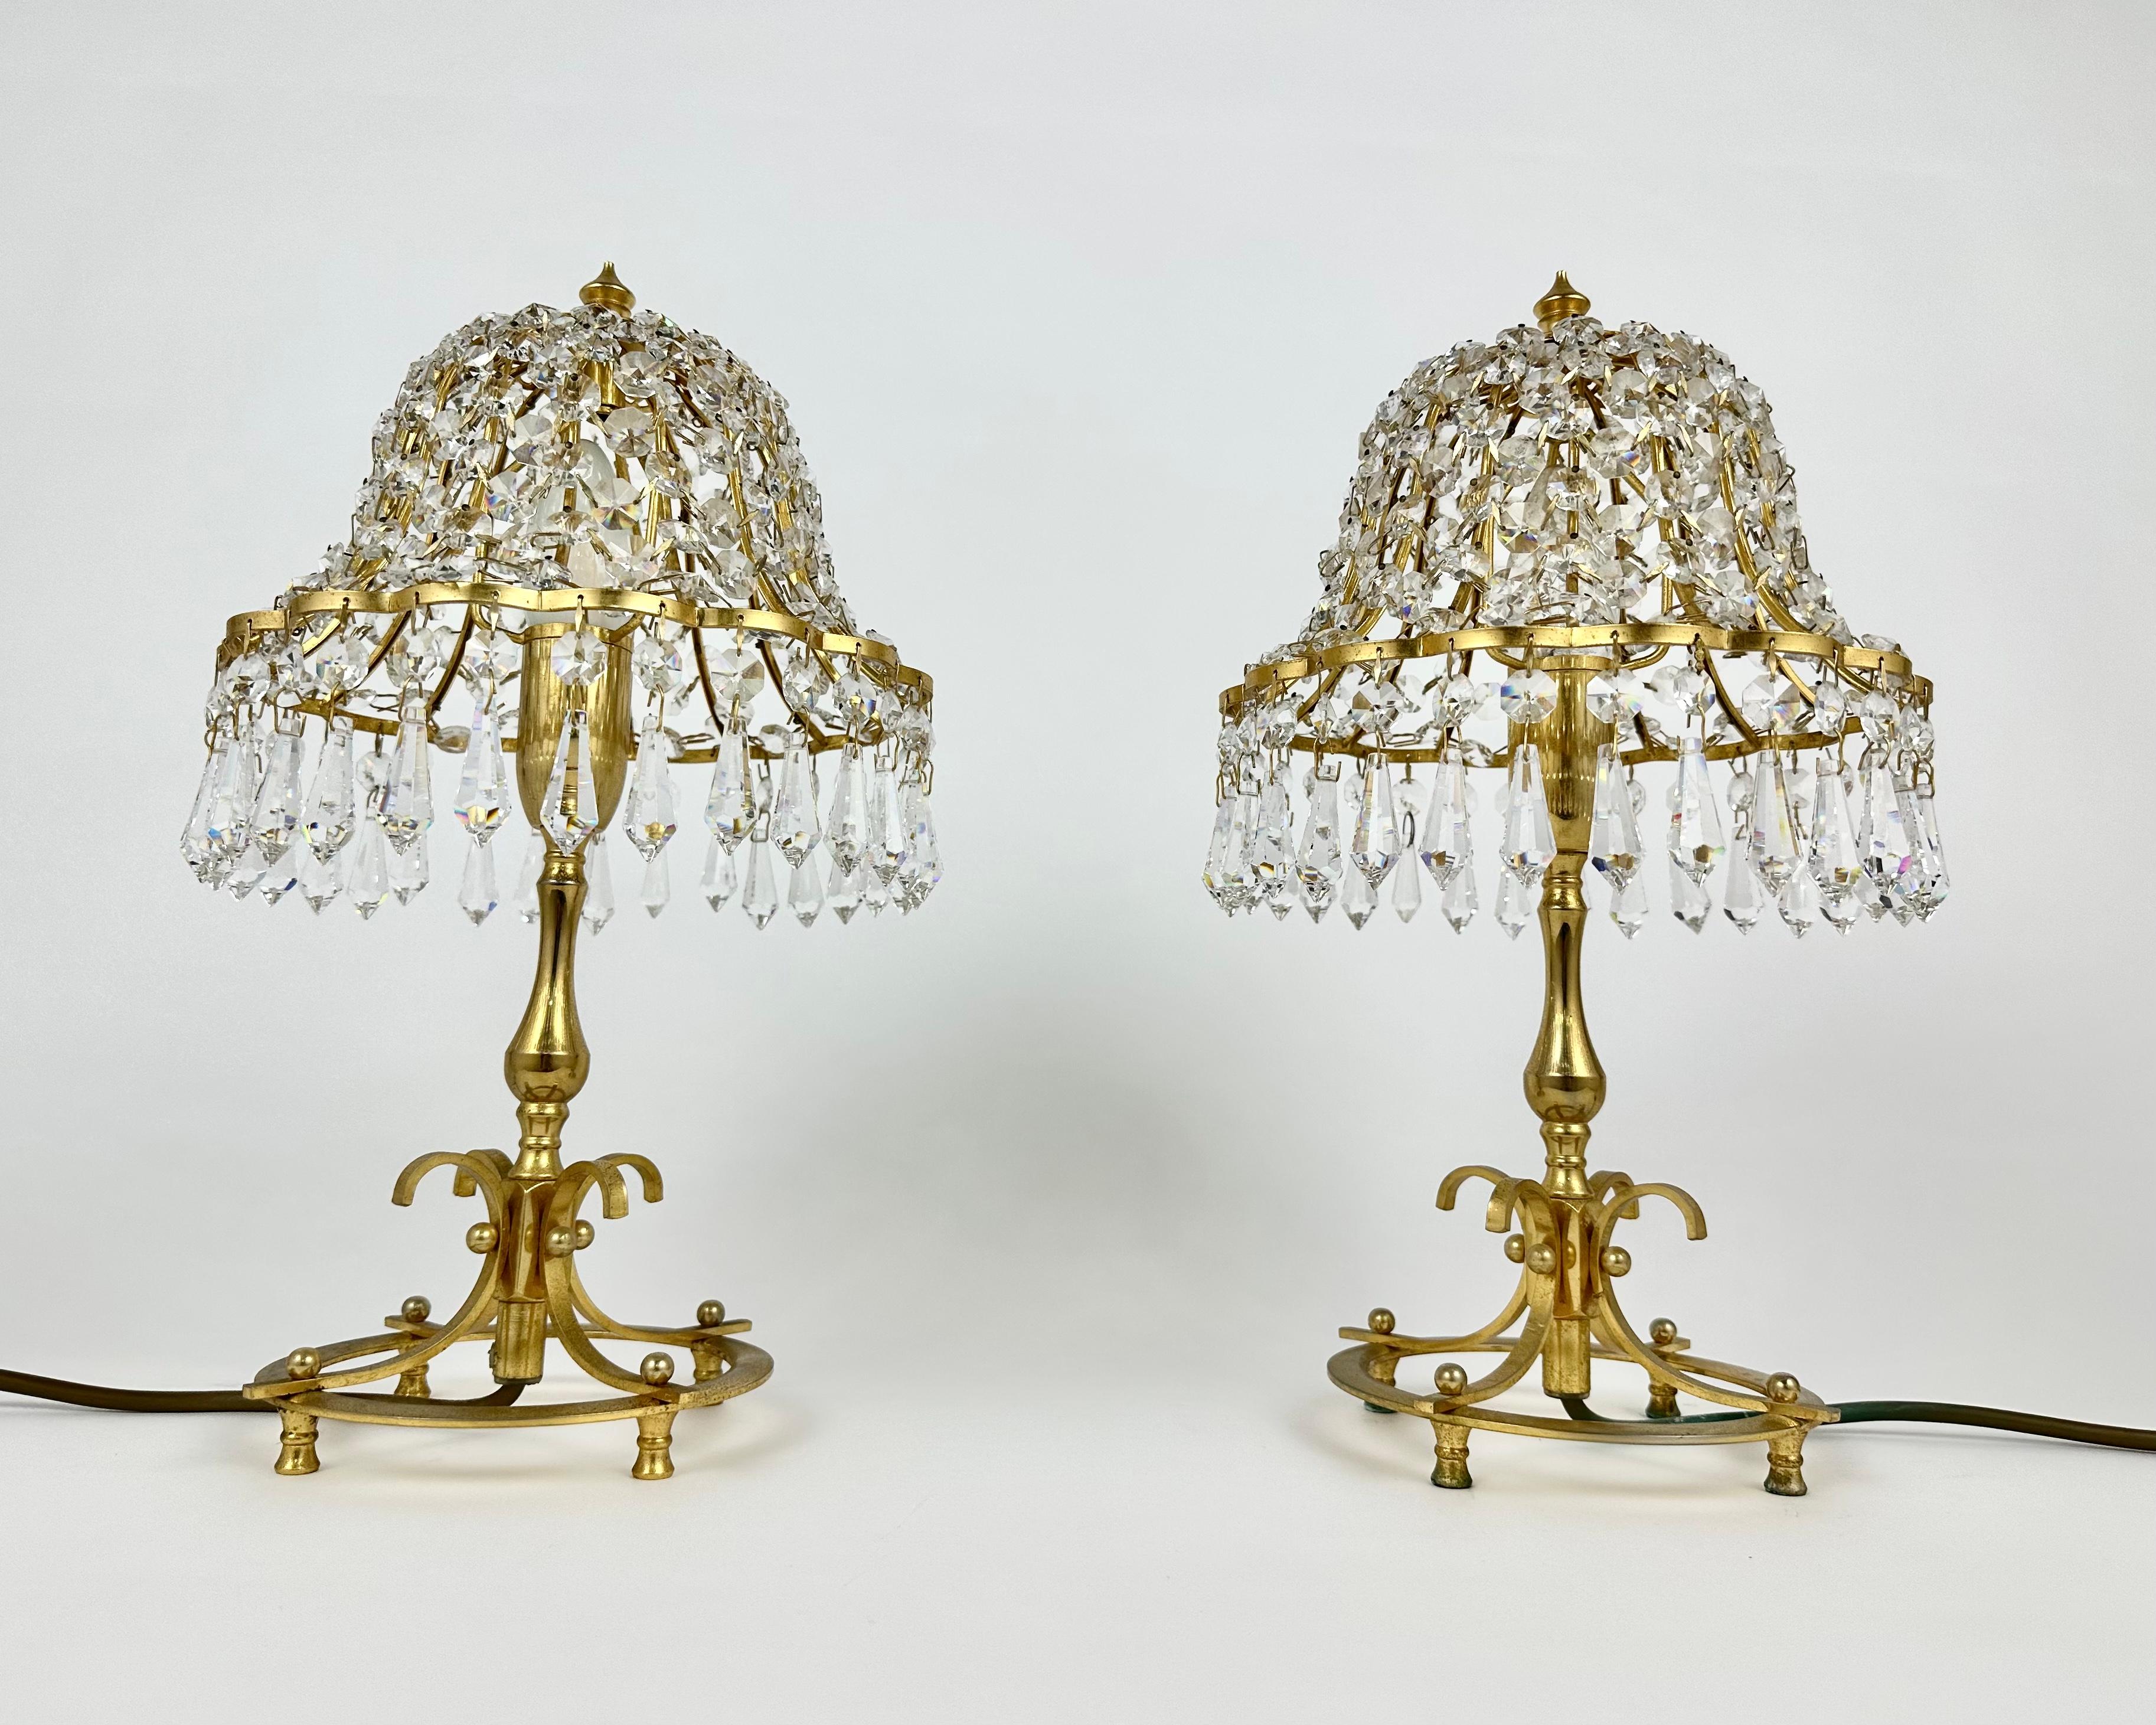 Unique Table Lamps With Lead Crystal Shades France, 1960s In Excellent Condition For Sale In Bastogne, BE